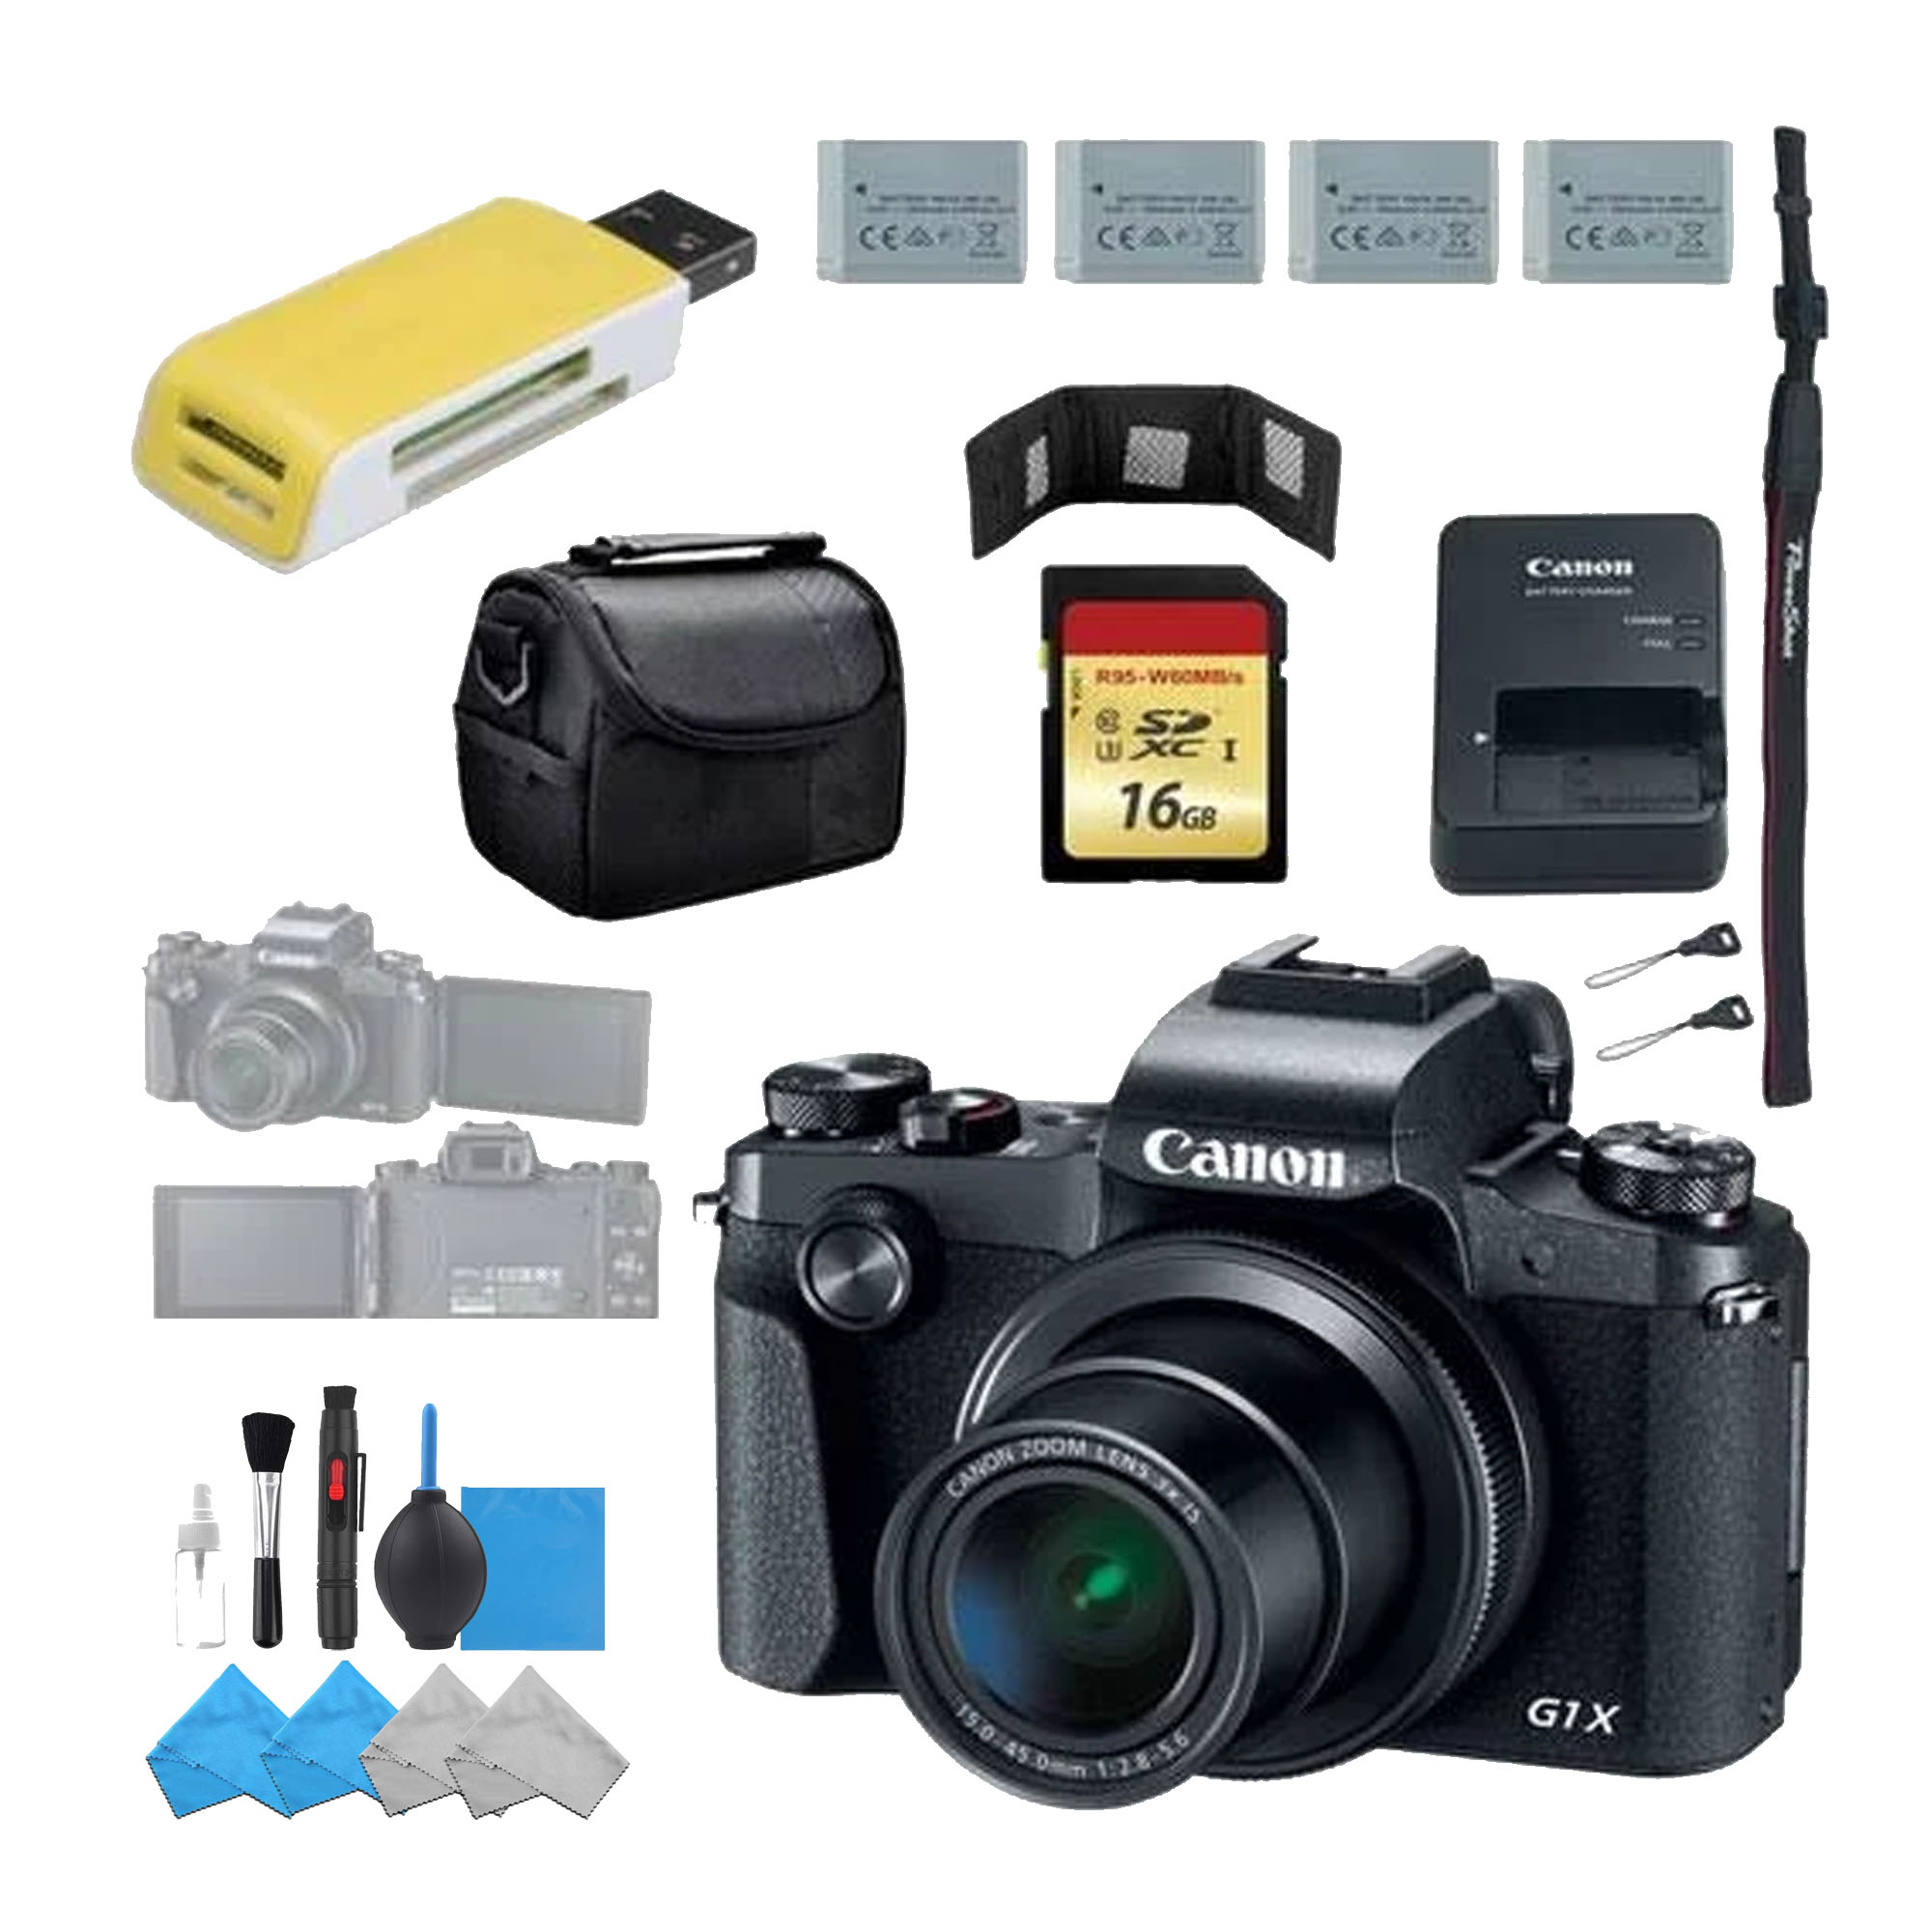 Canon PowerShot G1 X 14.3 MP 4x Batteries And More - image 1 of 1